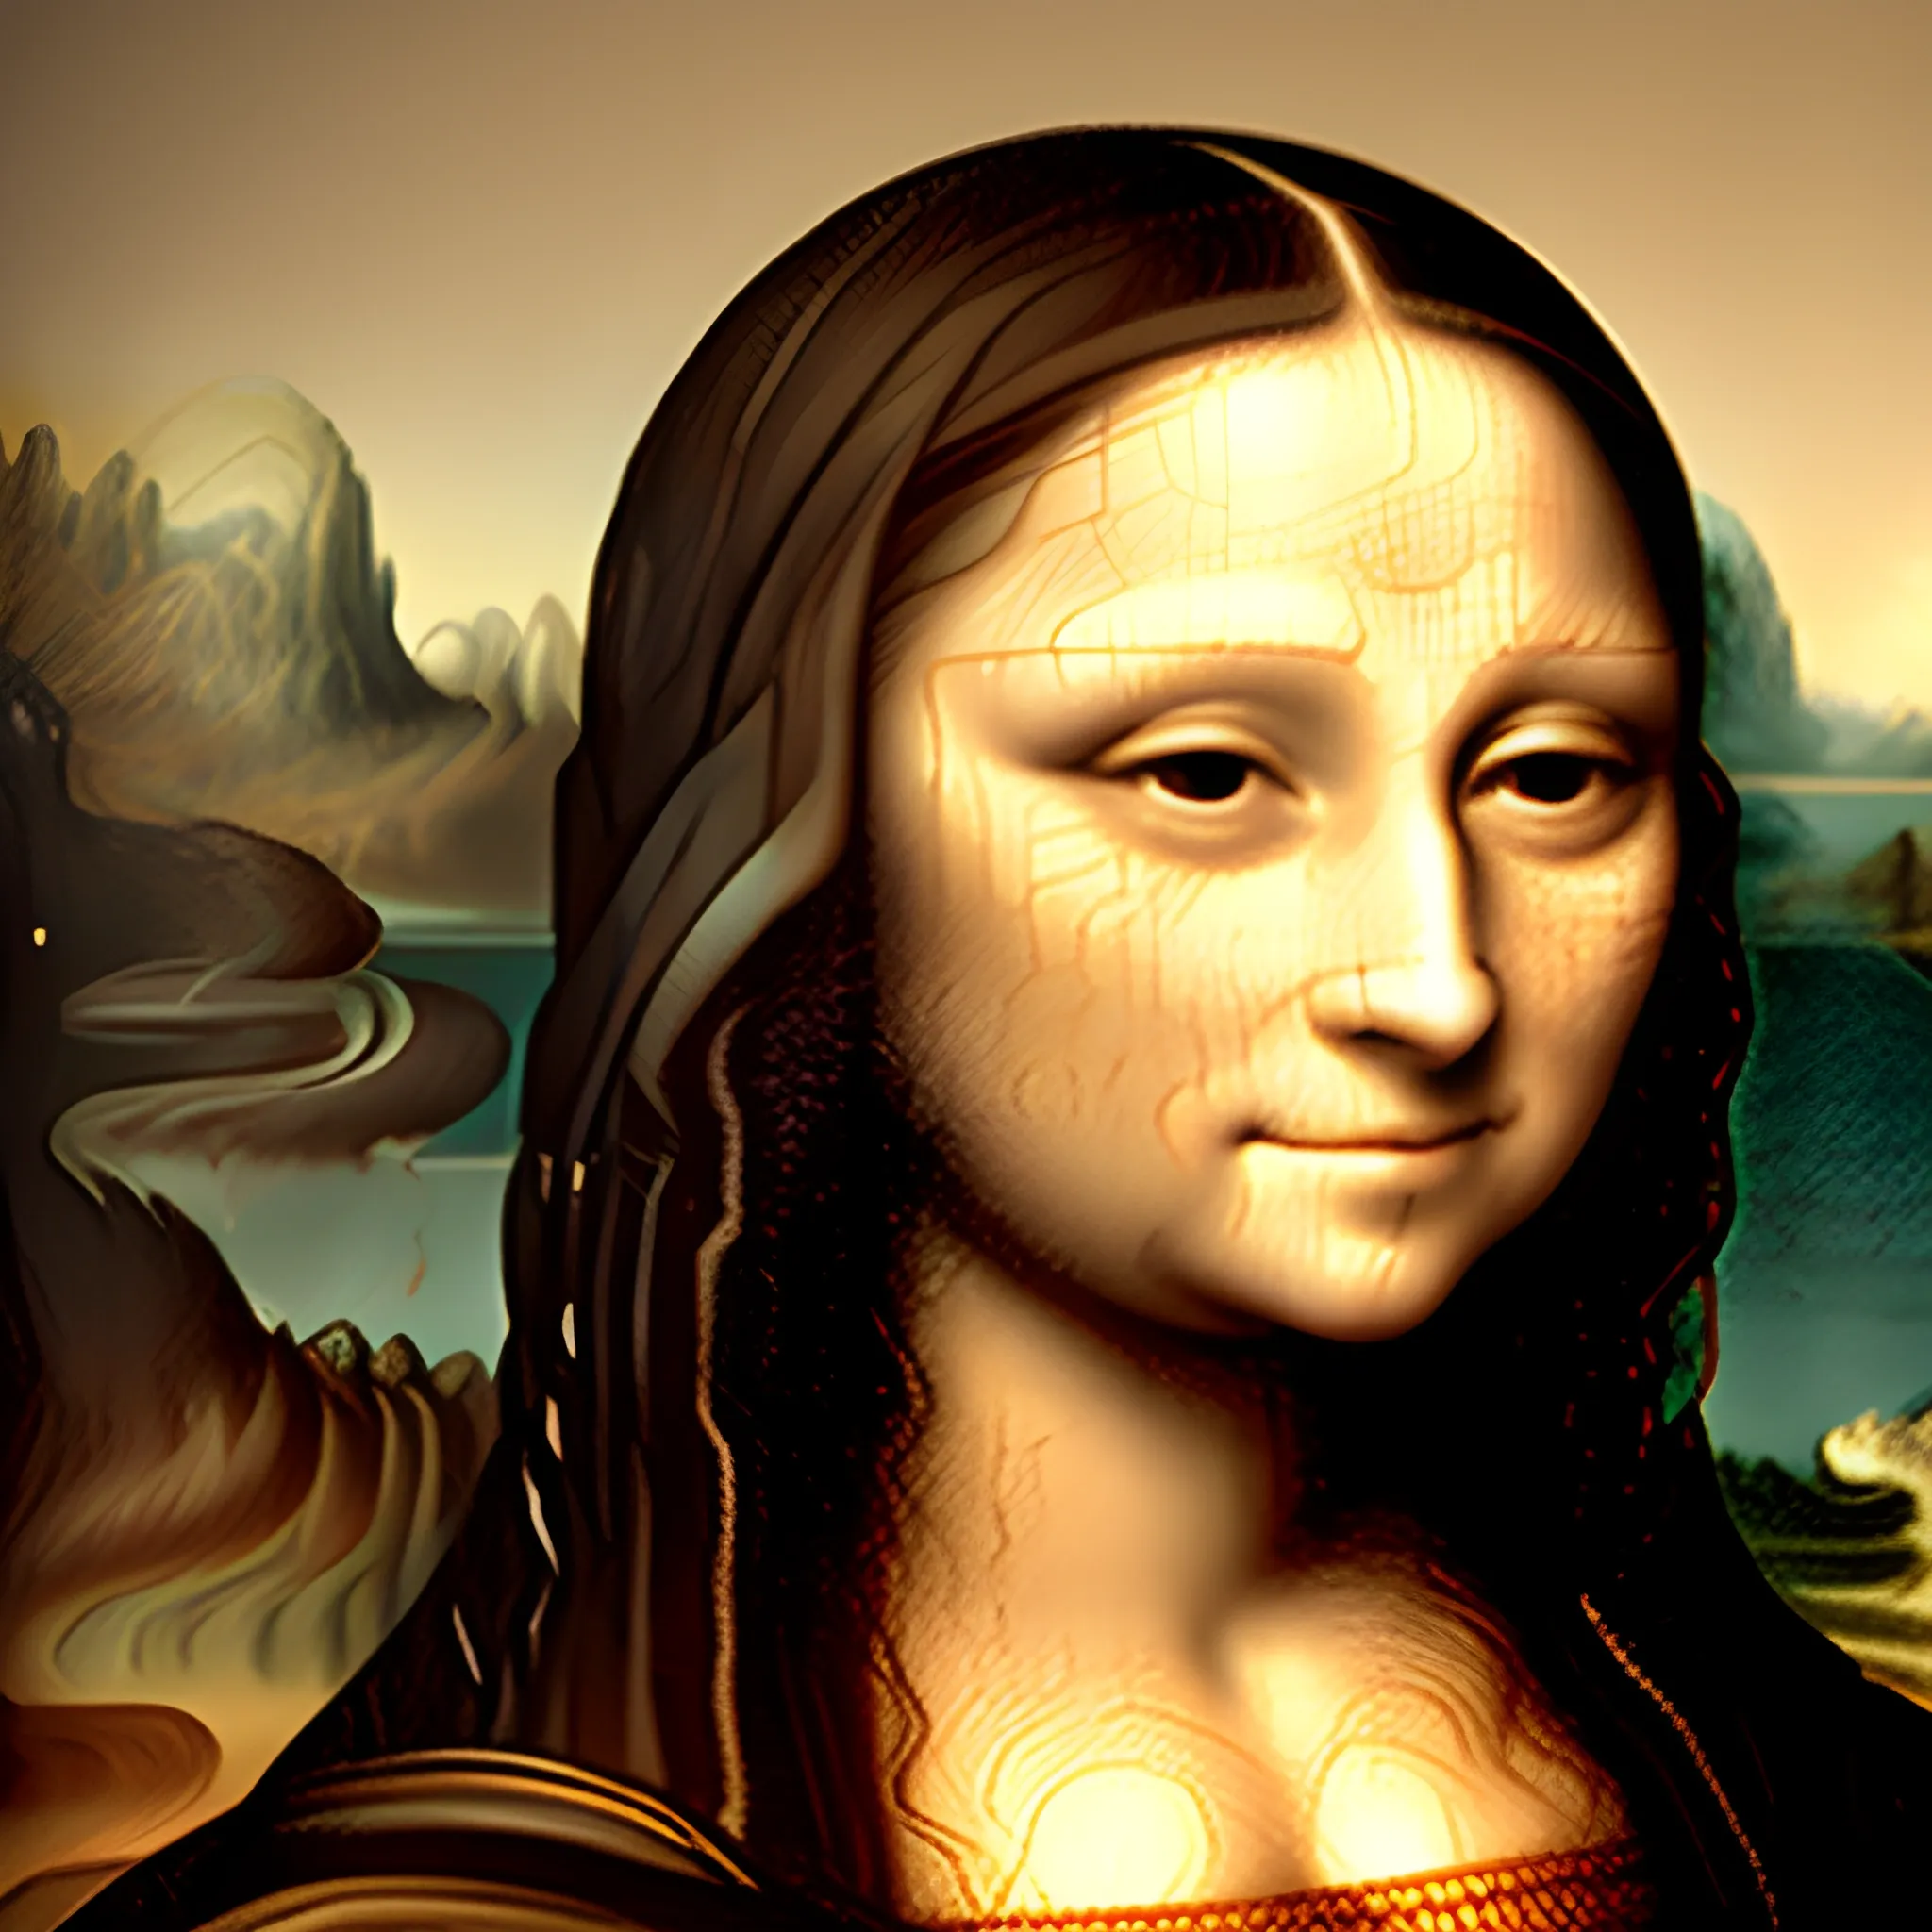 Generate an image of the Mona Lisa adapted with the head of a funny FACE 
dog that blends with the figure, in color, and in 4K.